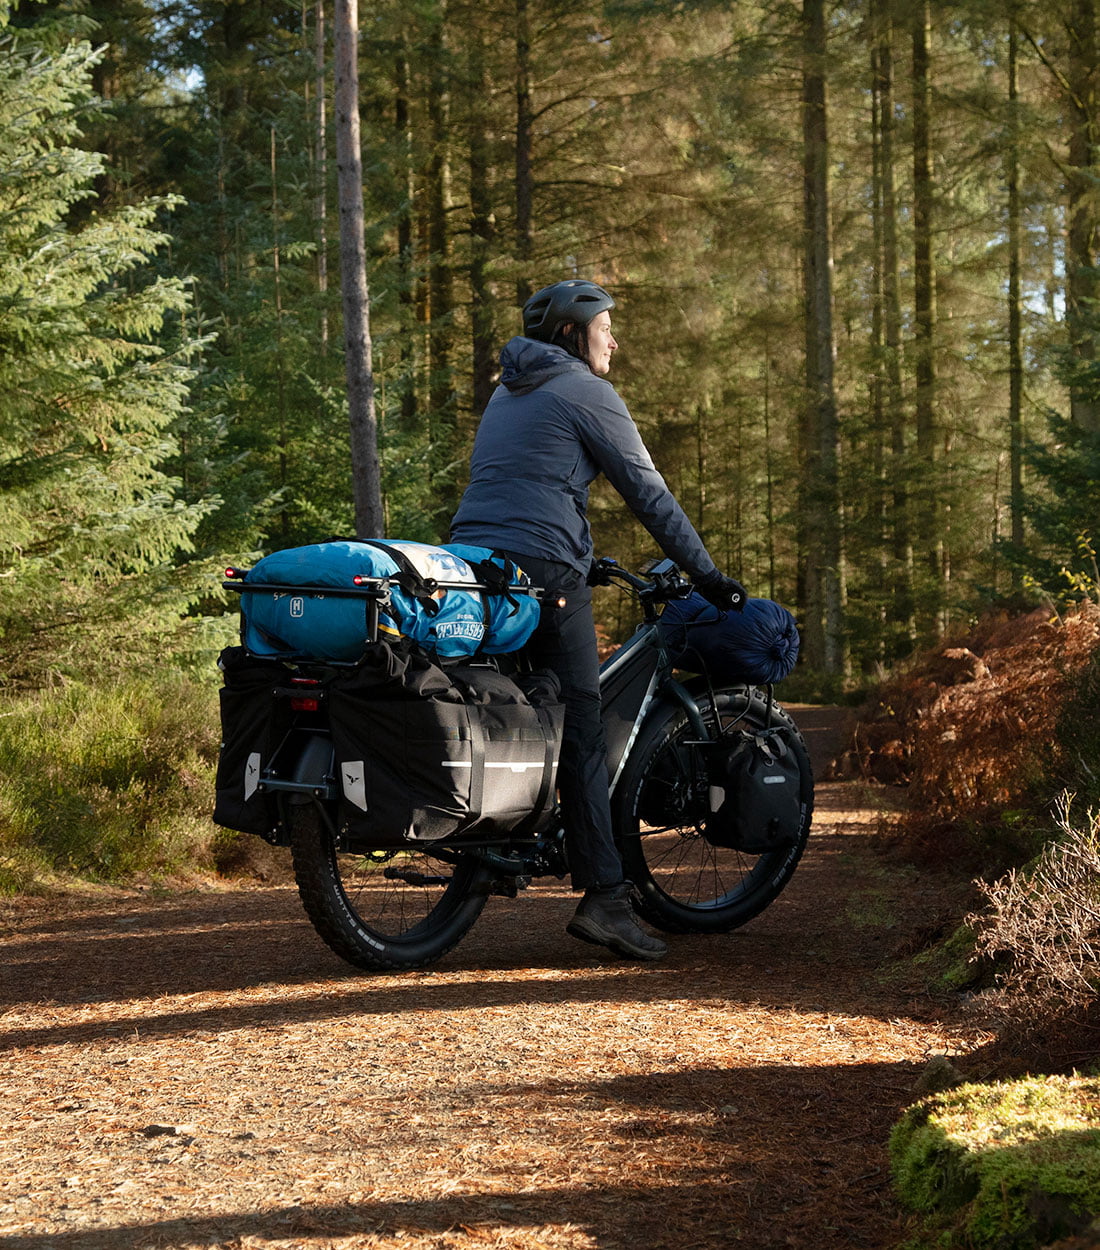 Ride in the woods with two water proff panniers